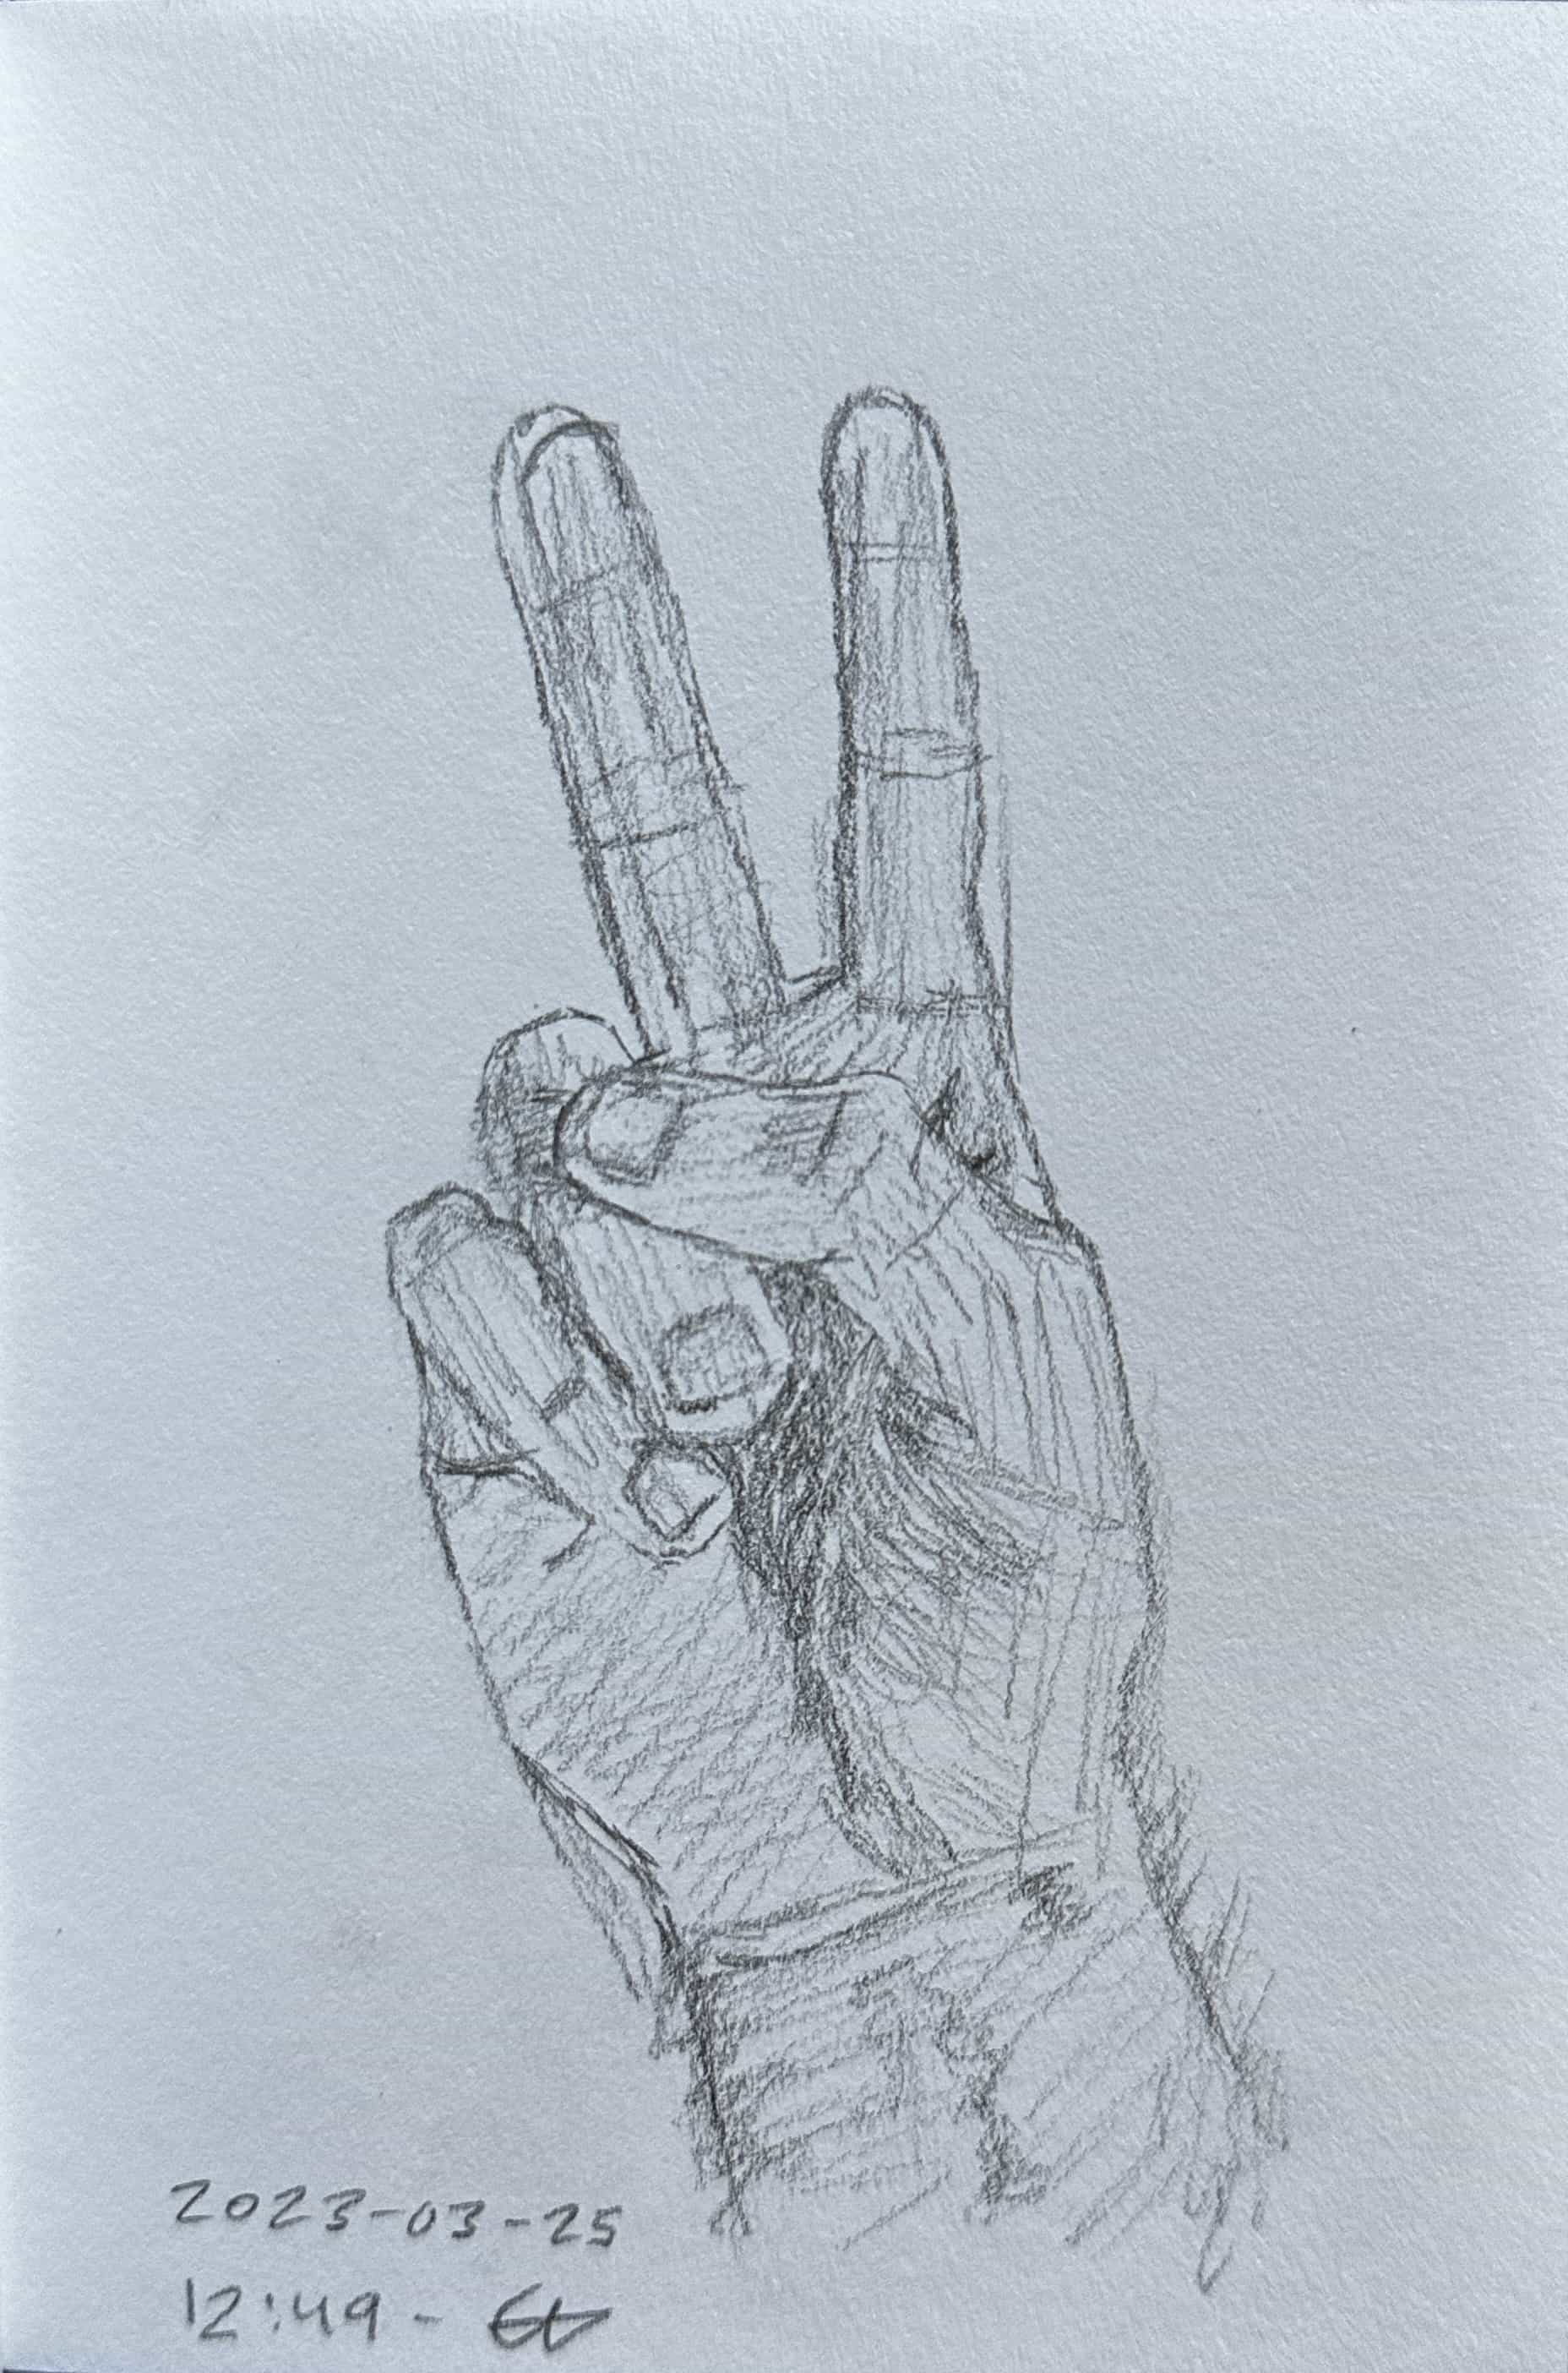 Sketch of a peace sign